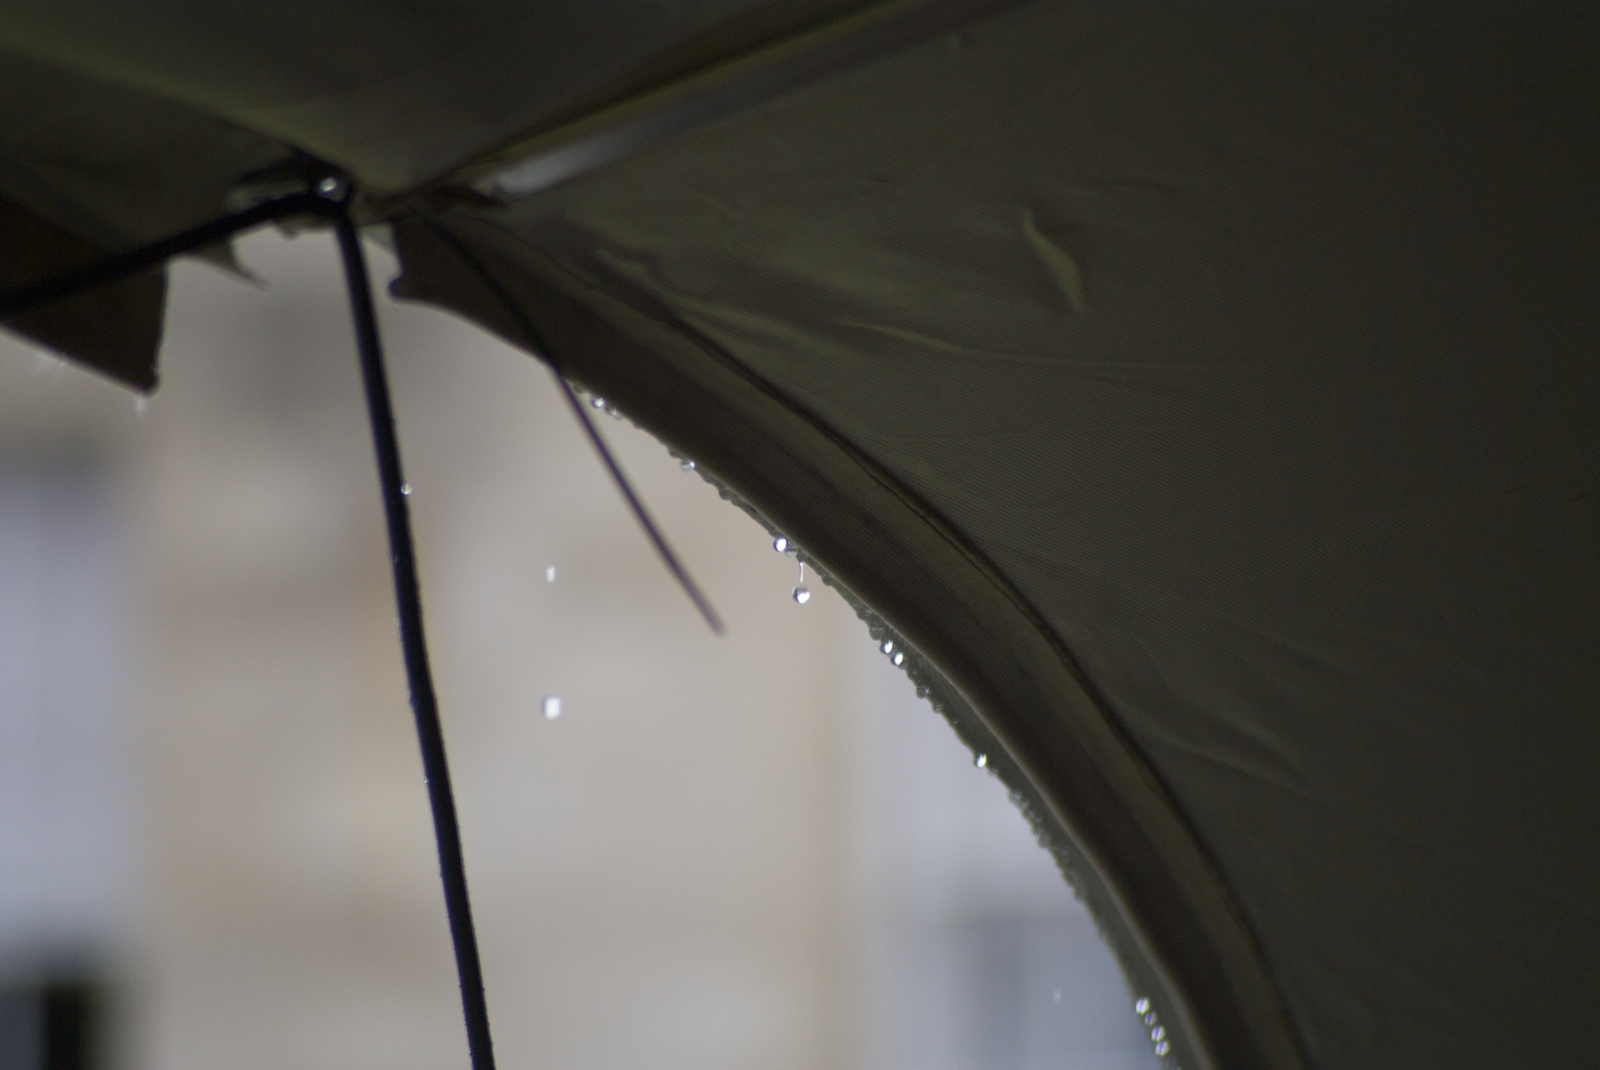 a close up of an umbrella with water droplets